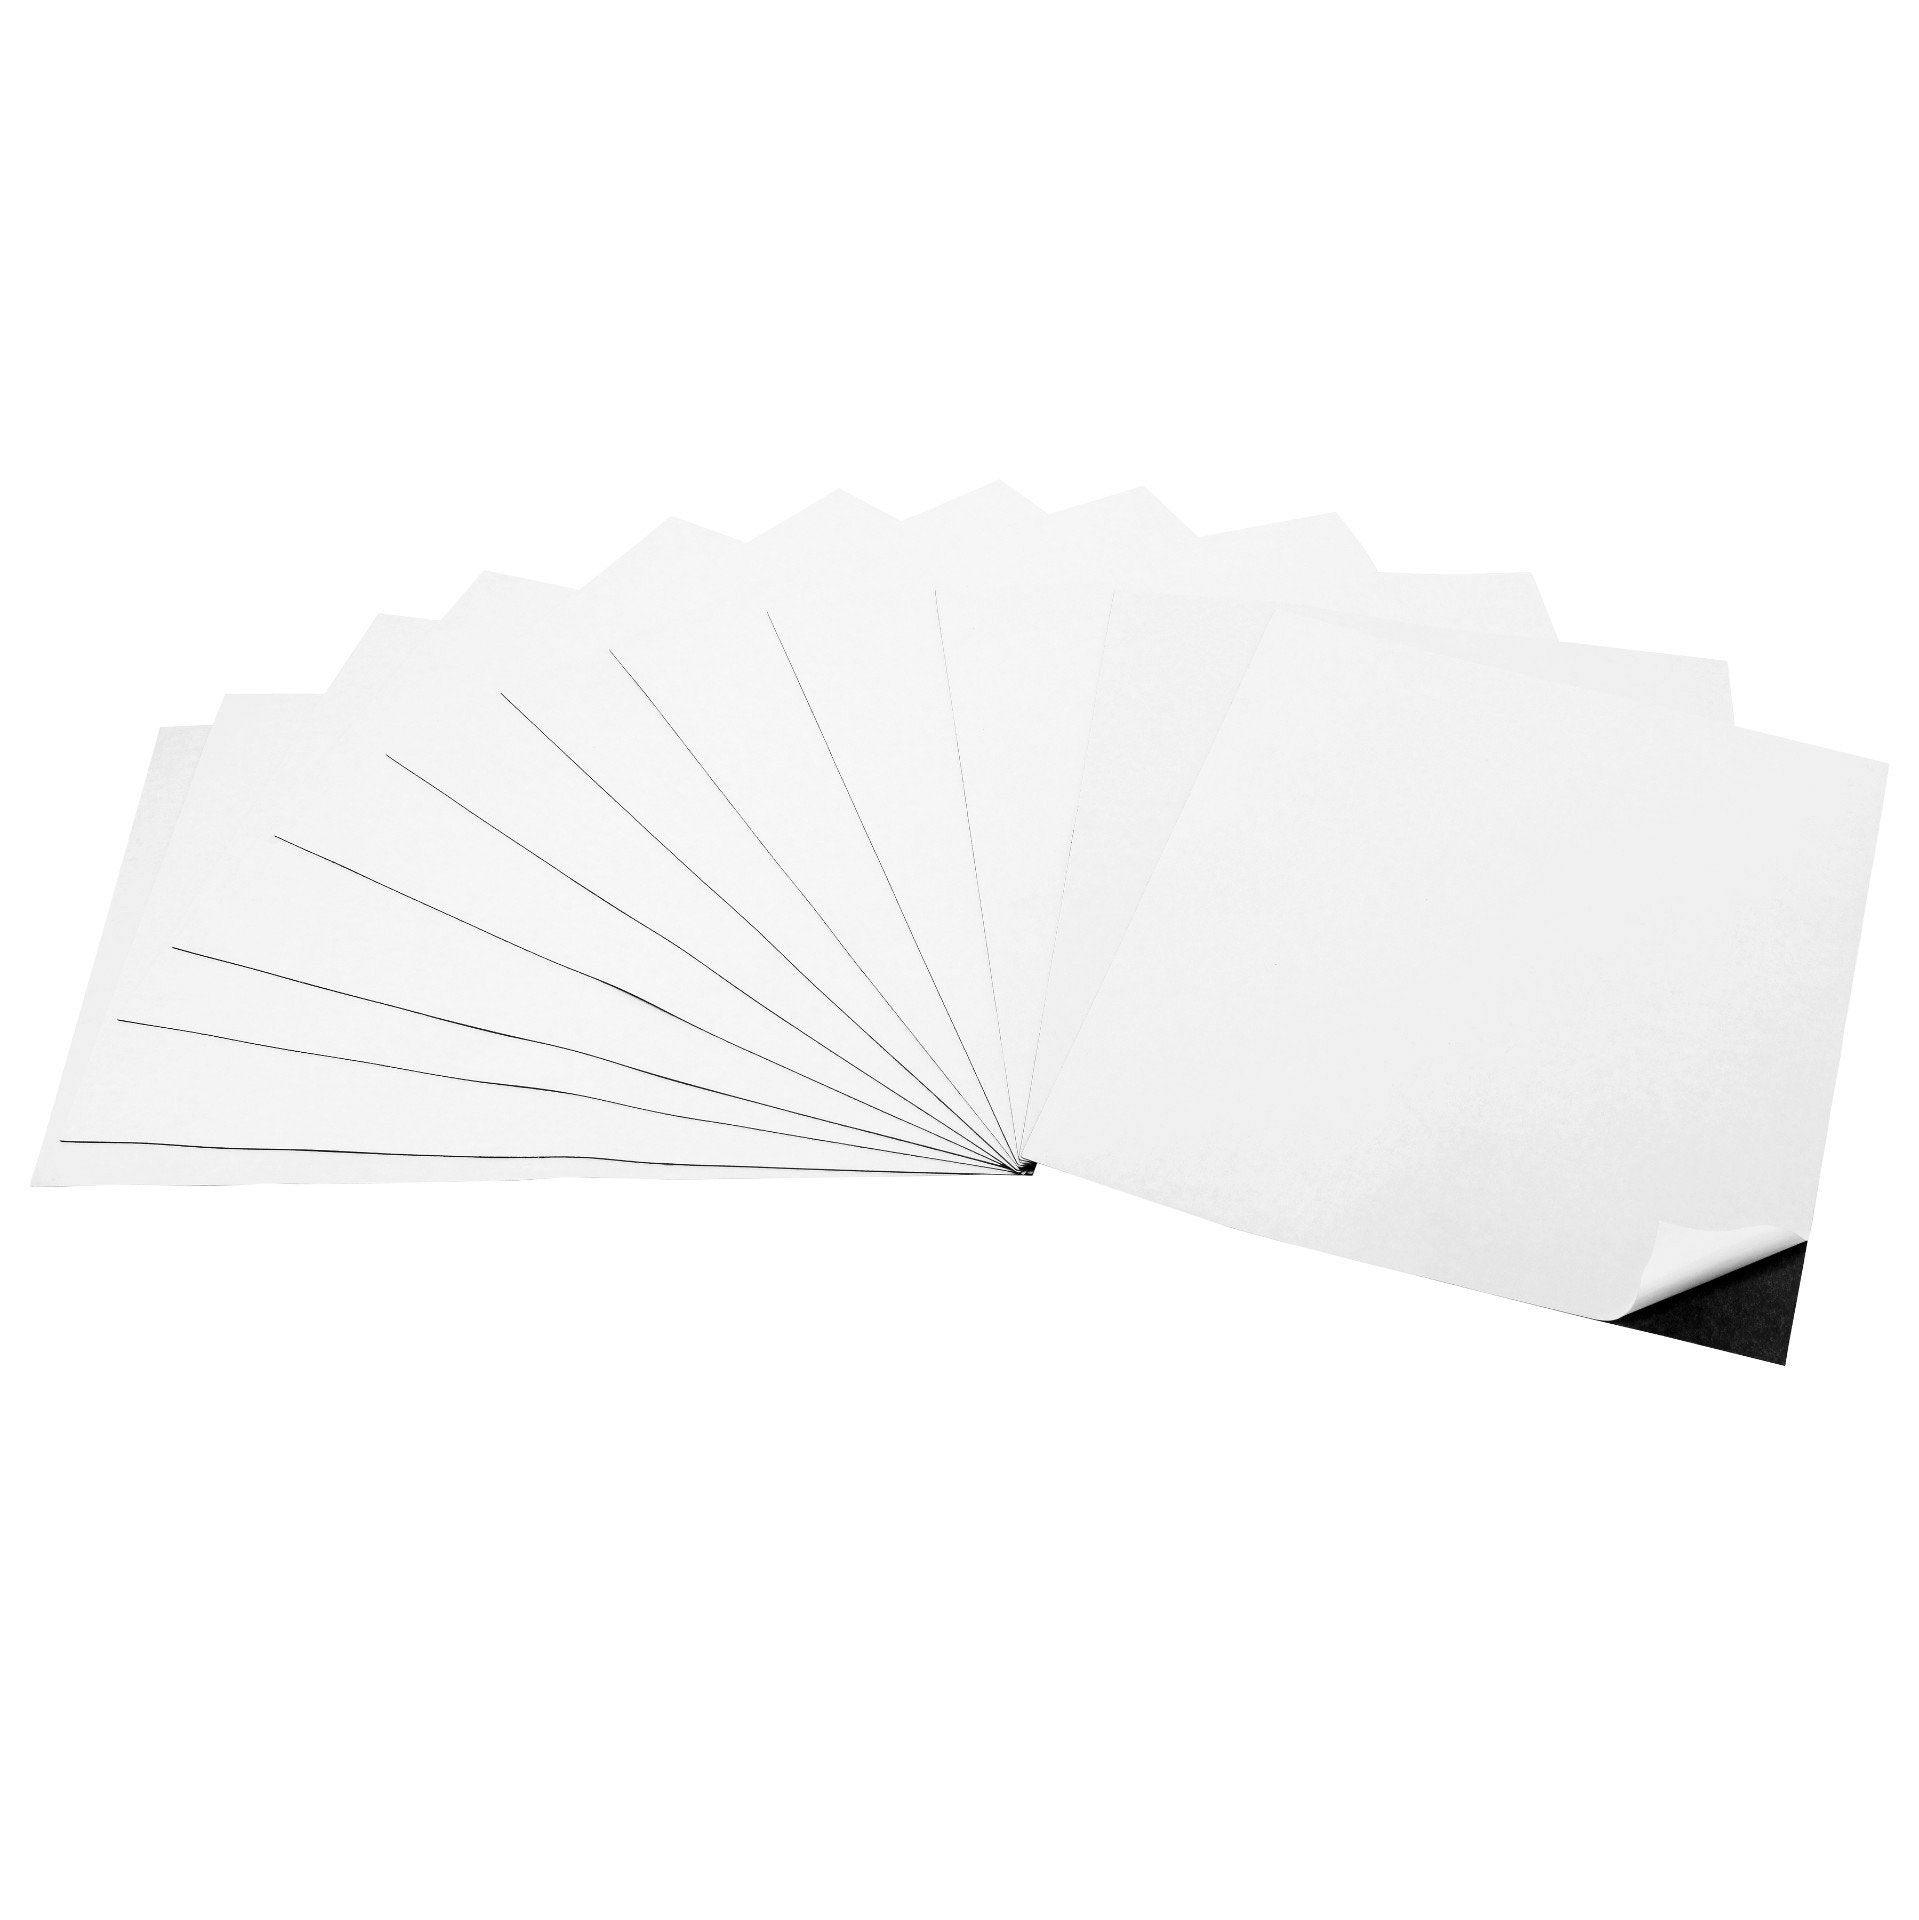 50 Self Adhesive Flexible Magnetic Sheets 8.5 x 11 inches